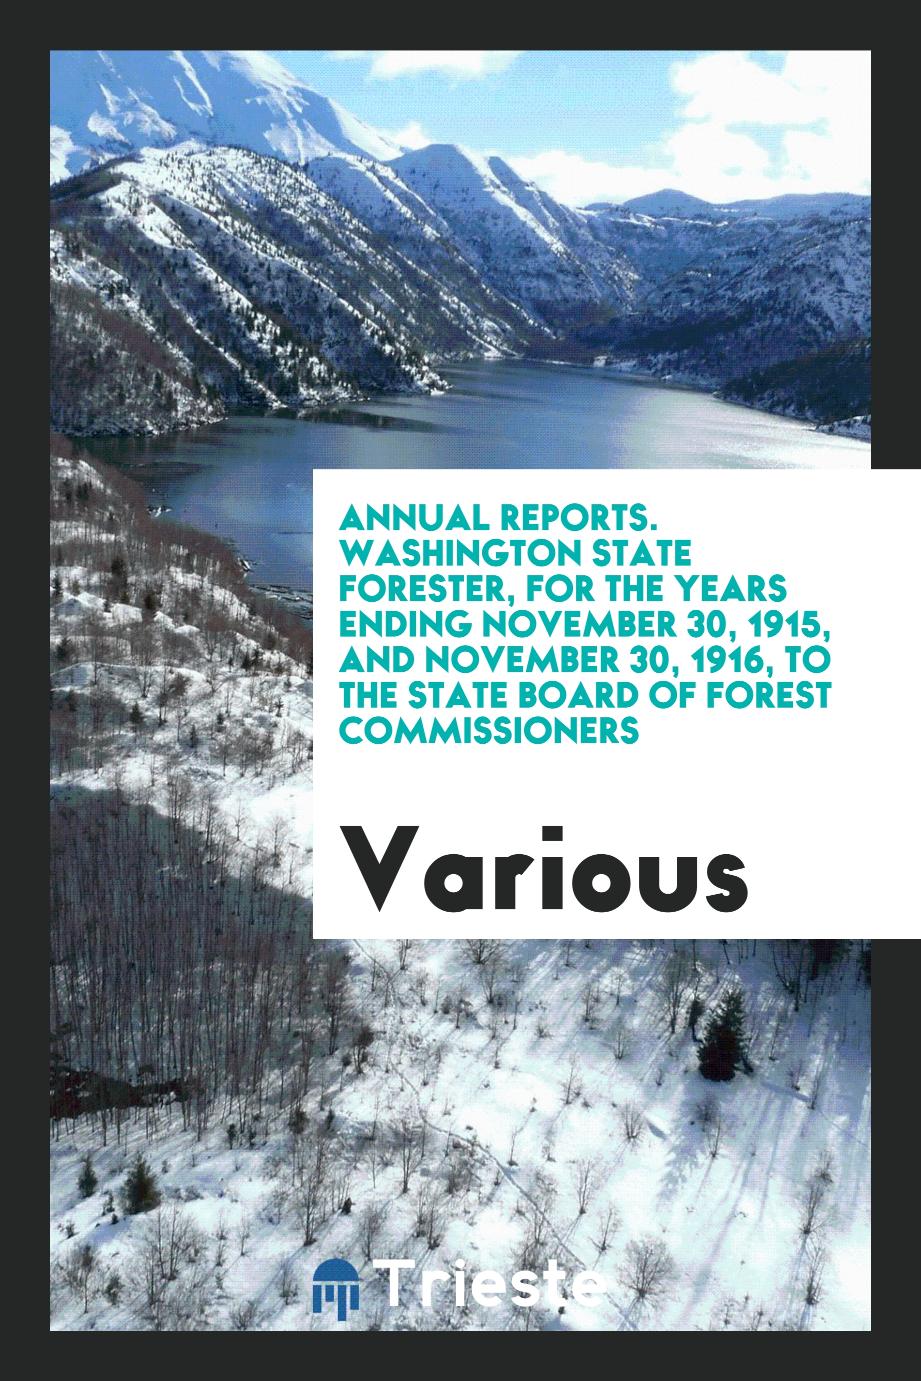 Annual Reports. Washington State Forester, for the years ending November 30, 1915, and November 30, 1916, to the State Board of Forest Commissioners